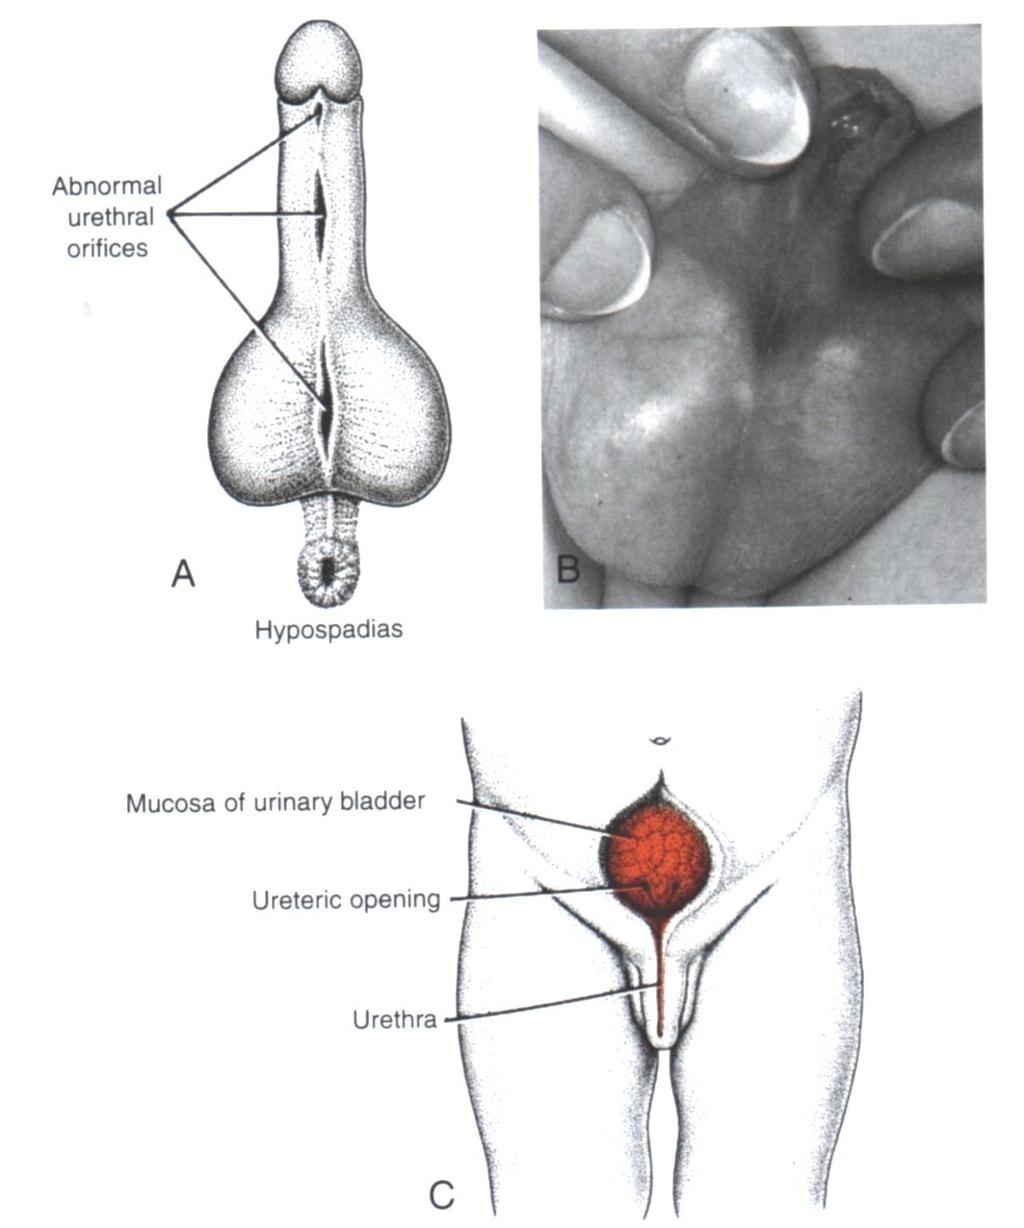 Hypospadias - Fusion of the urethral fold is incomplete